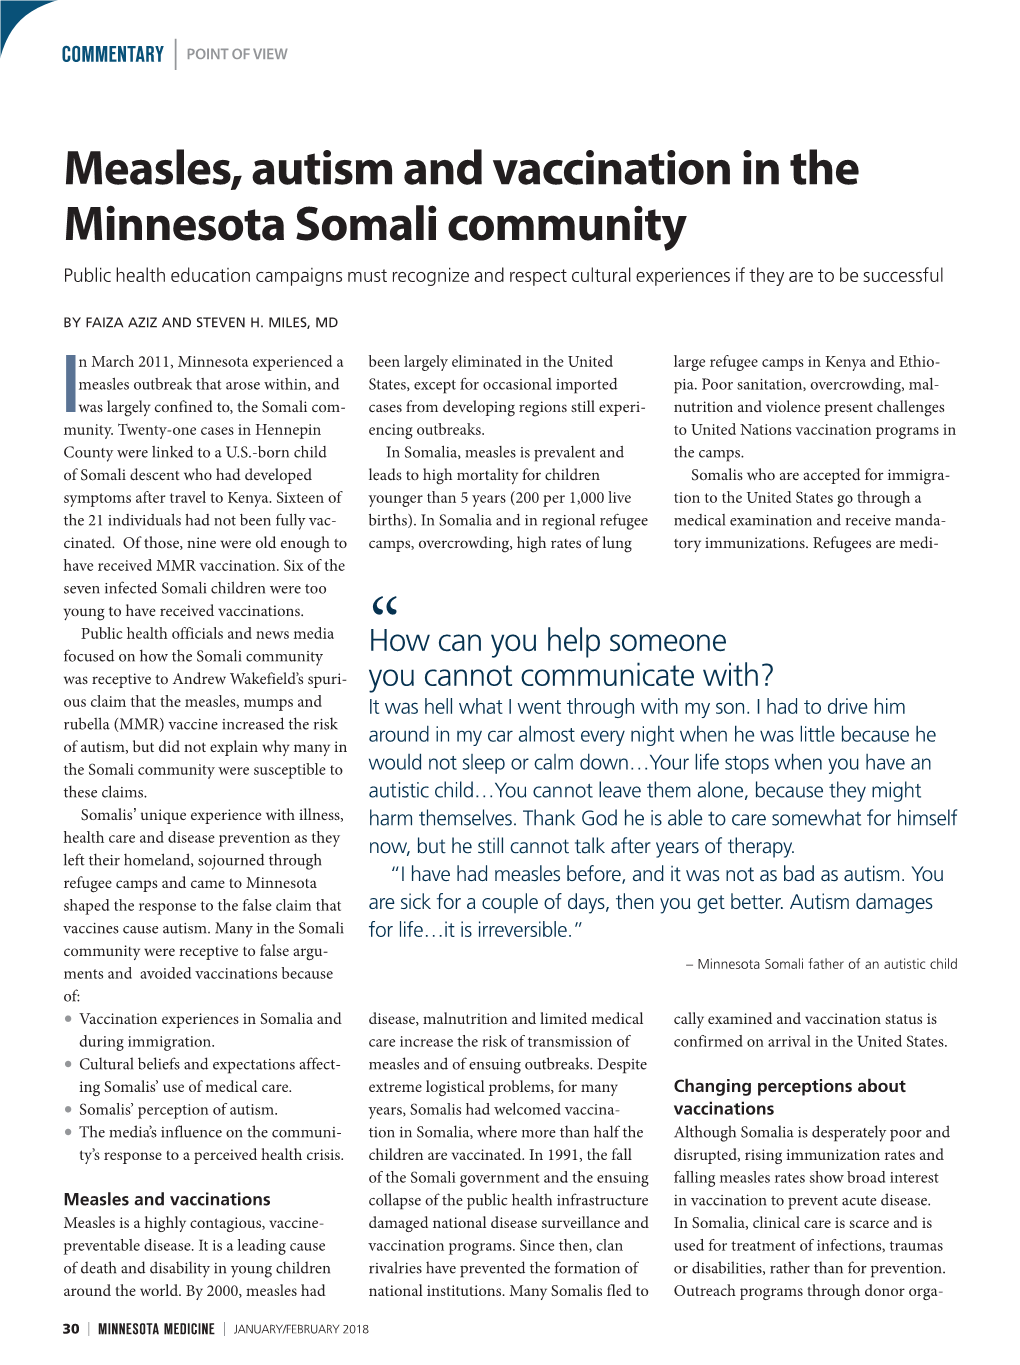 Measles, Autism and Vaccination in the Minnesota Somali Community